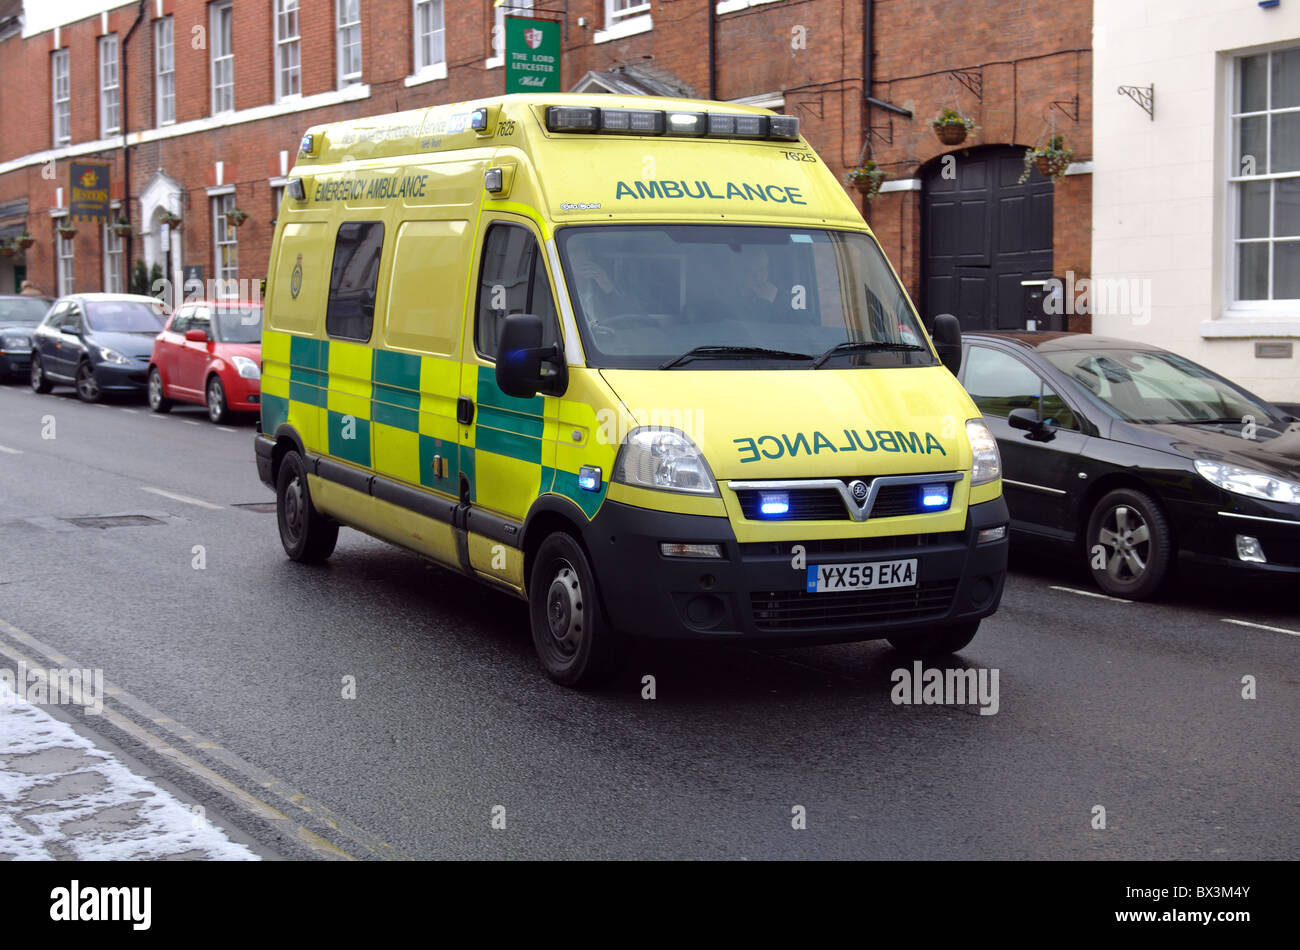 Ambulance on emergency call in town centre, Warwick, UK Stock Photo